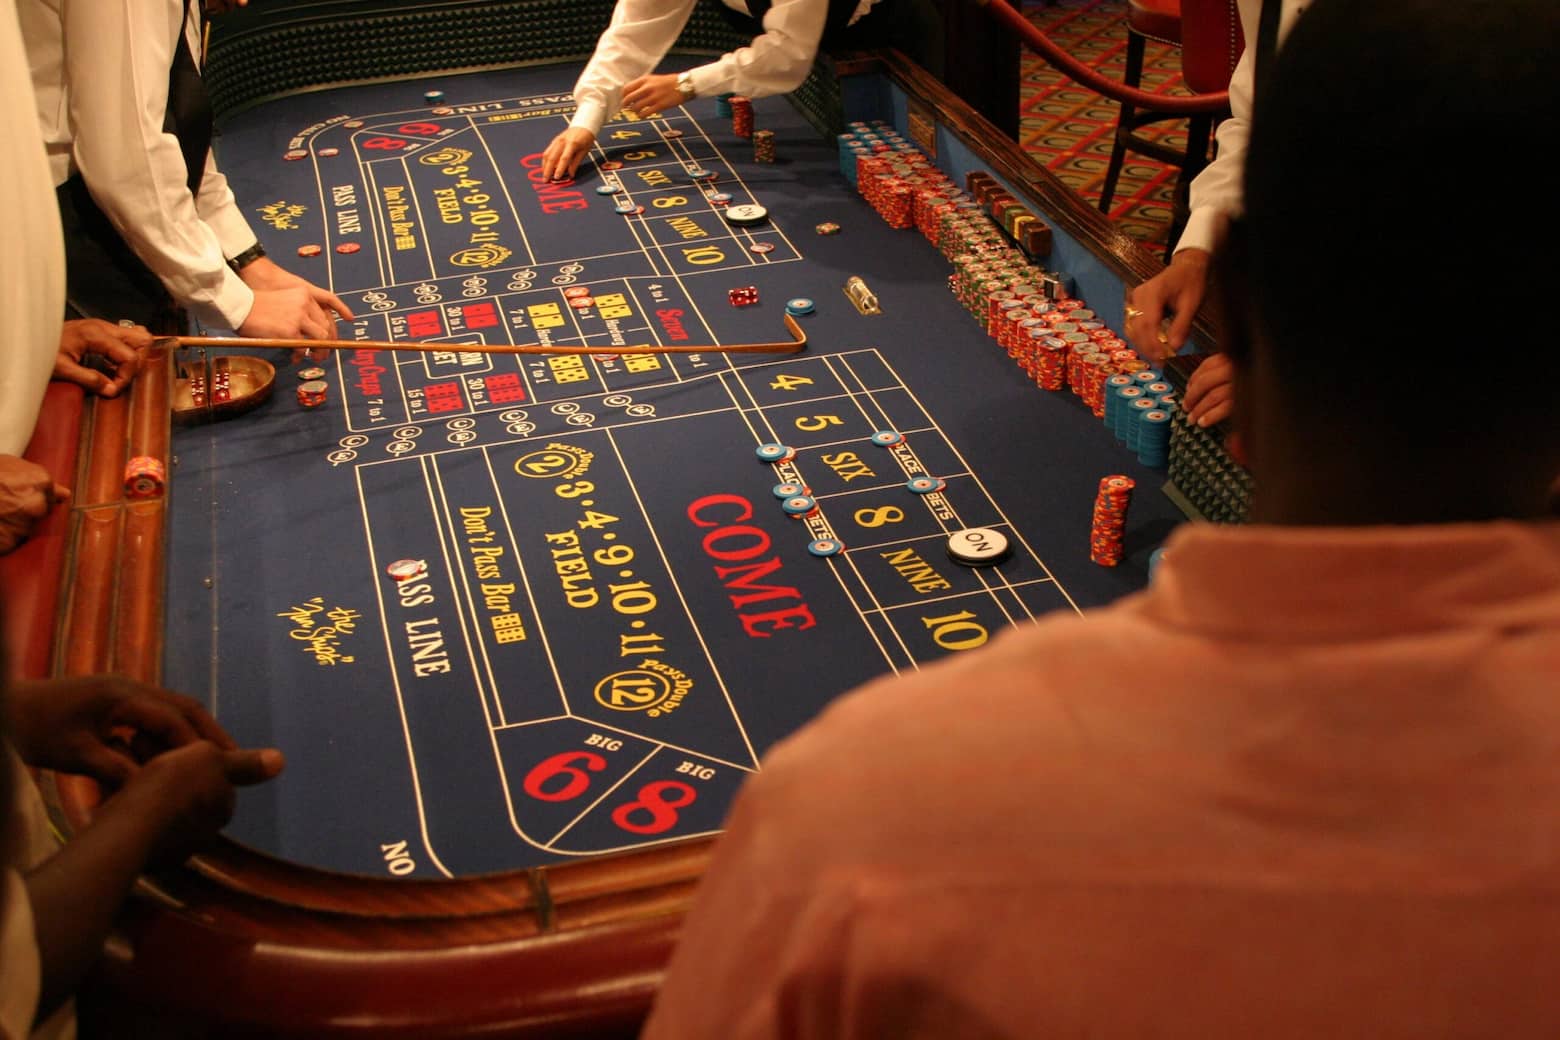 How Much Can You Really Win At An Online Casino?